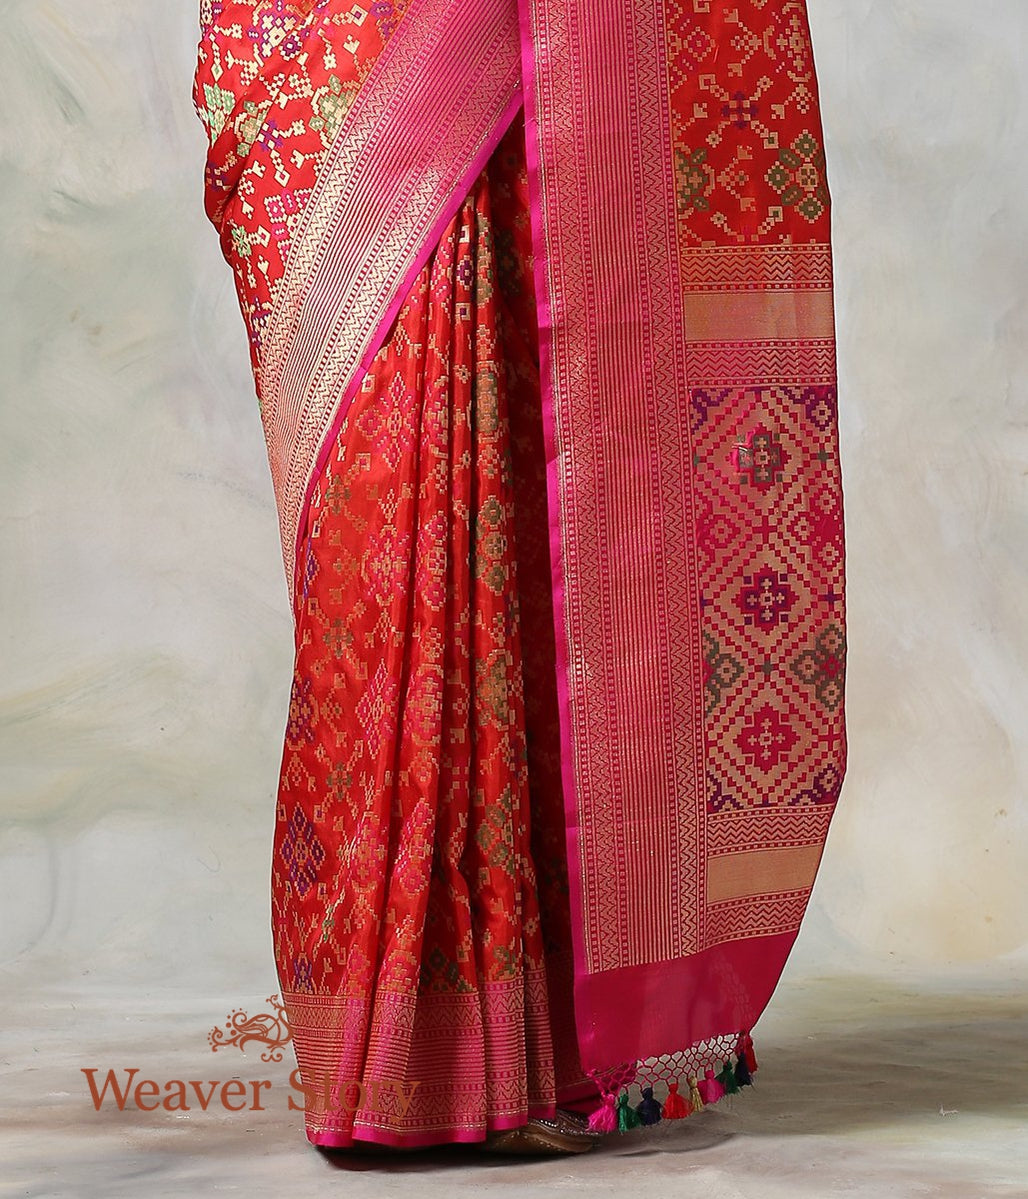 Handwoven_Banarasi_Patola_Saree_in_Red_with_a_Contrast_Blouse_WeaverStory_04